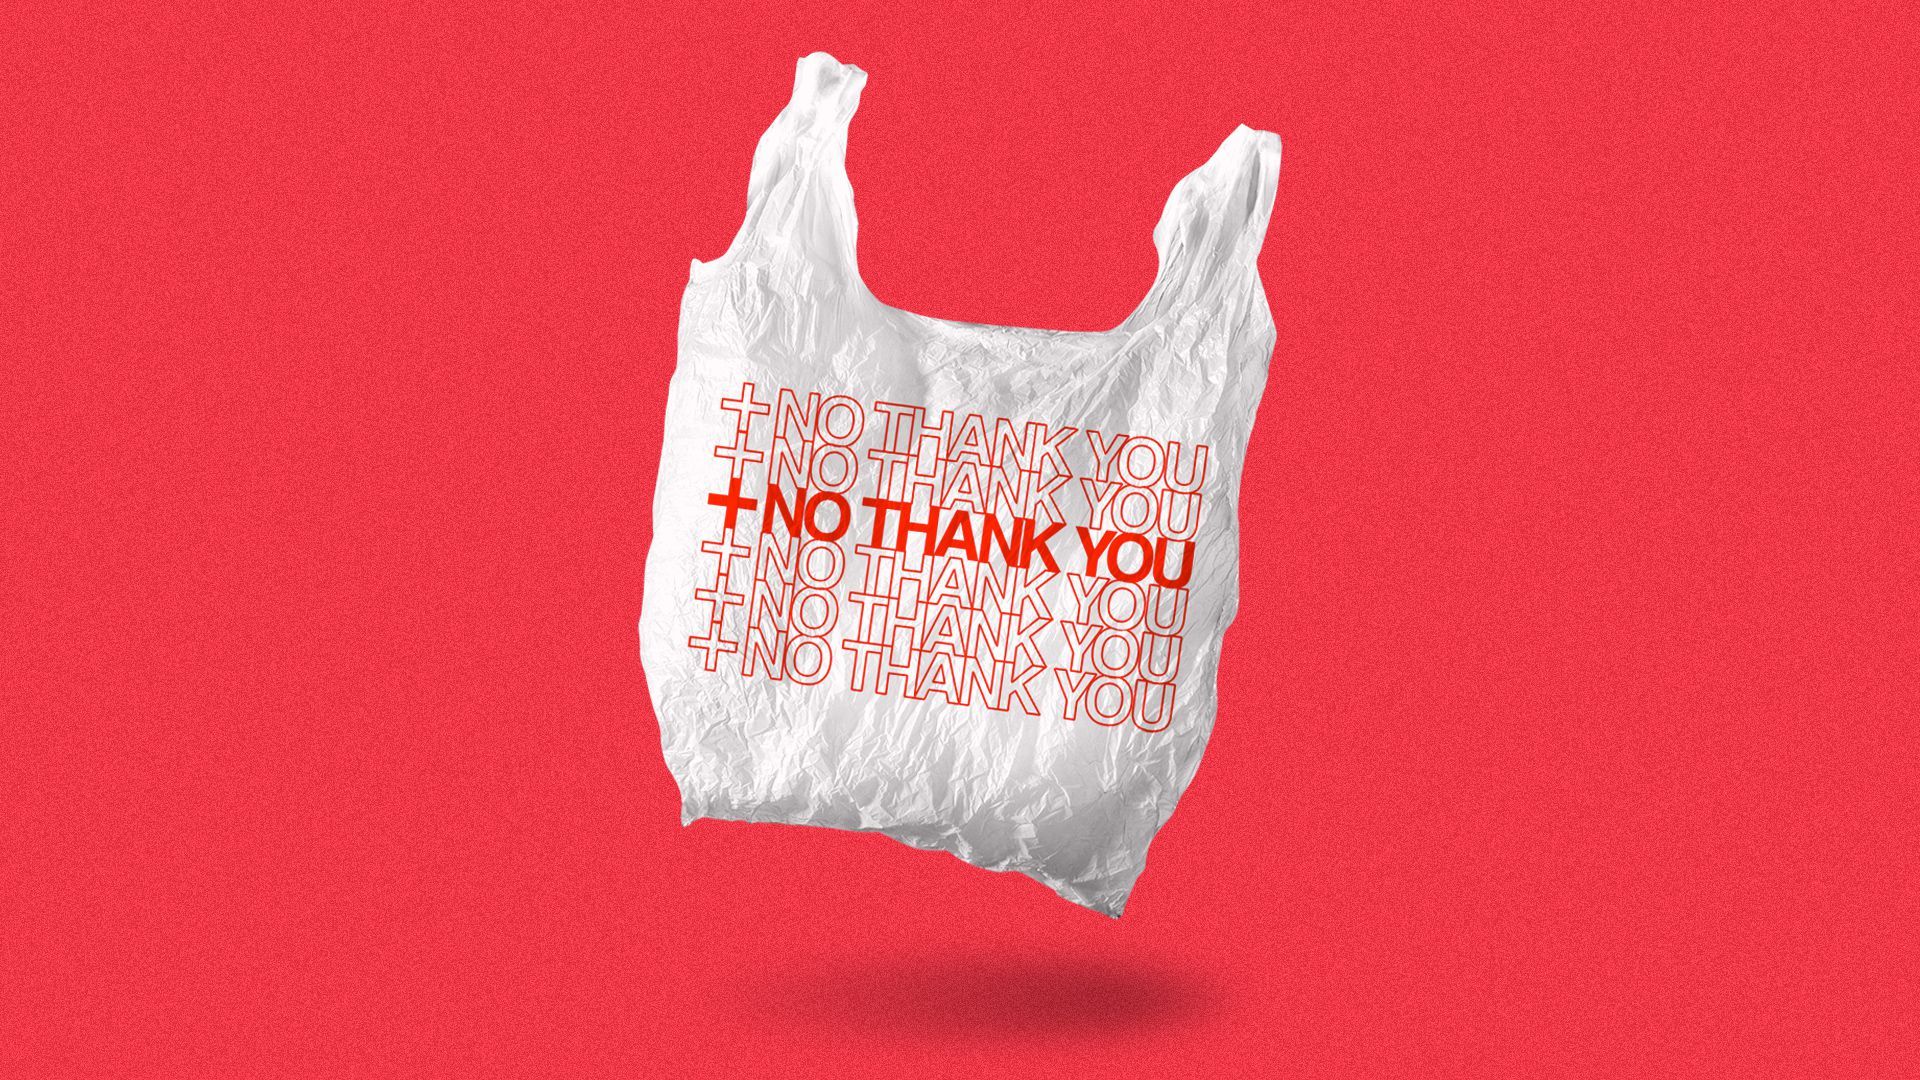 Illustration of a plastic bag with "NO THANK YOU" printed multiple times on it alongside a health plus.